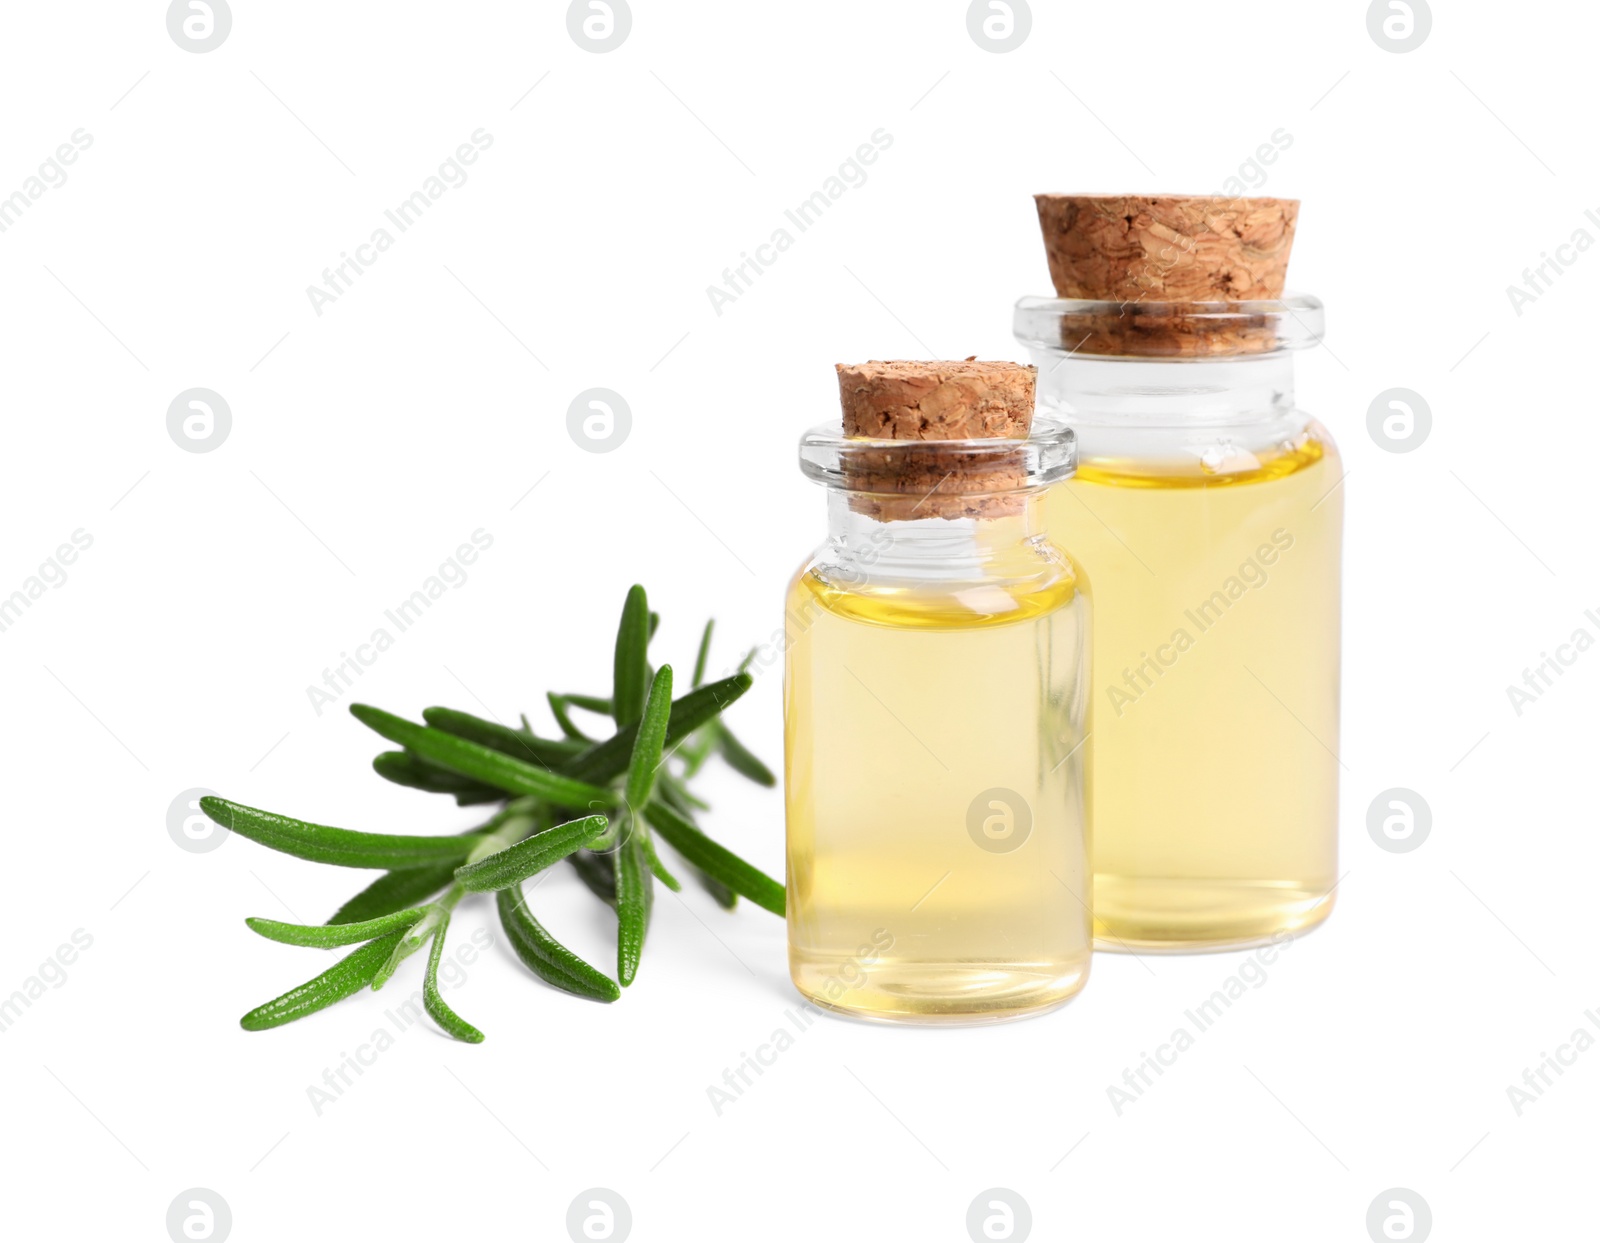 Photo of Sprig of fresh rosemary and essential oil on white background